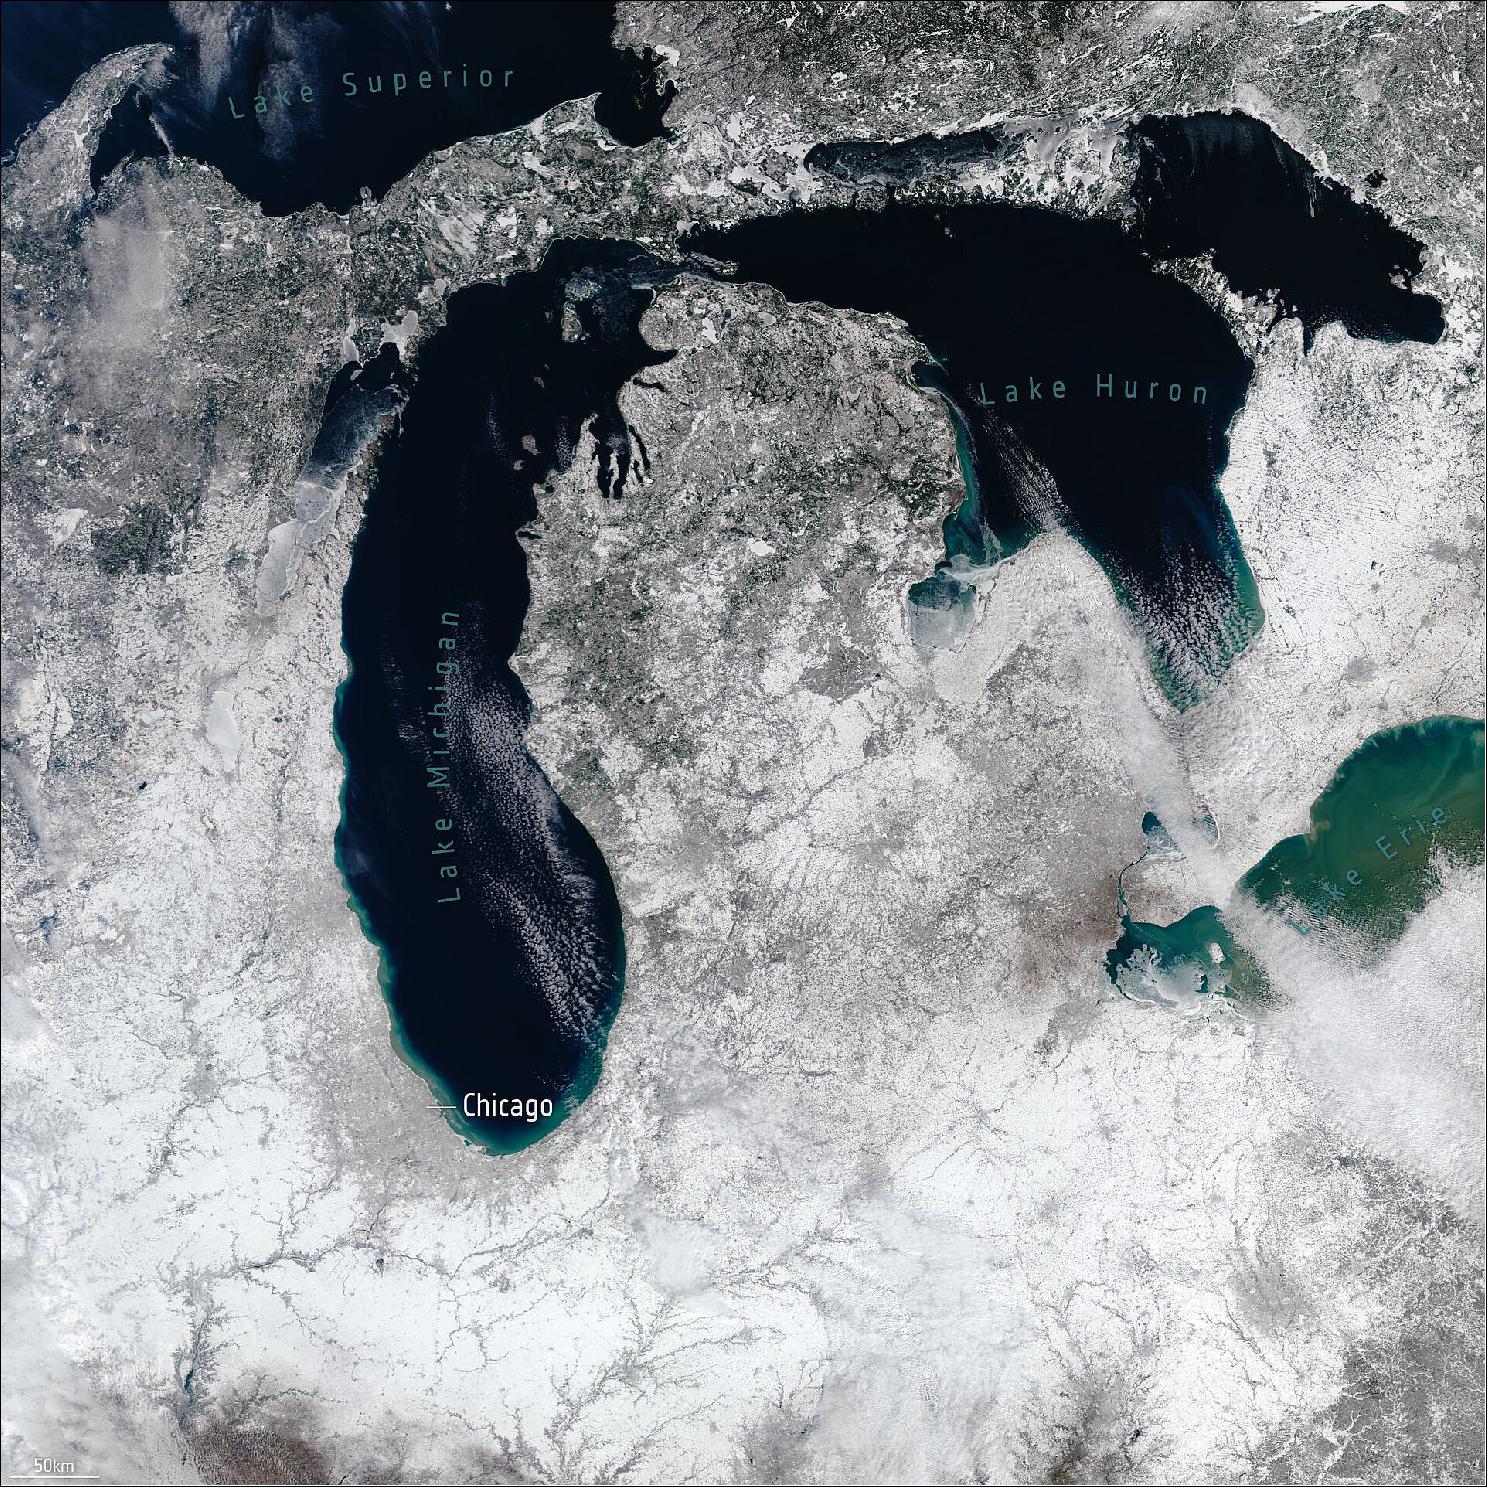 Figure 21: This image of snow in the Great Lakes region in the US was captured by the Copernicus Sentinel-3 mission's ocean and land color instrument on 3 February 2021. While there are reports of record-low ice cover on the lakes this year, there has, nevertheless, been heavy snowfall across the Midwest and Great Lakes over the last few days. Snow has also hit the northeast US. It is thought that this winter's polar vortex is currently sending extreme icy blasts of Arctic weather to some parts of the northern hemisphere. Scientists are using wind information from ESA's Aeolus satellite to shed more light on the complex polar vortex phenomenon (image credit: ESA, the image contains modified Copernicus Sentinel data (2021), processed by ESA, CC BY-SA 3.0 IGO)